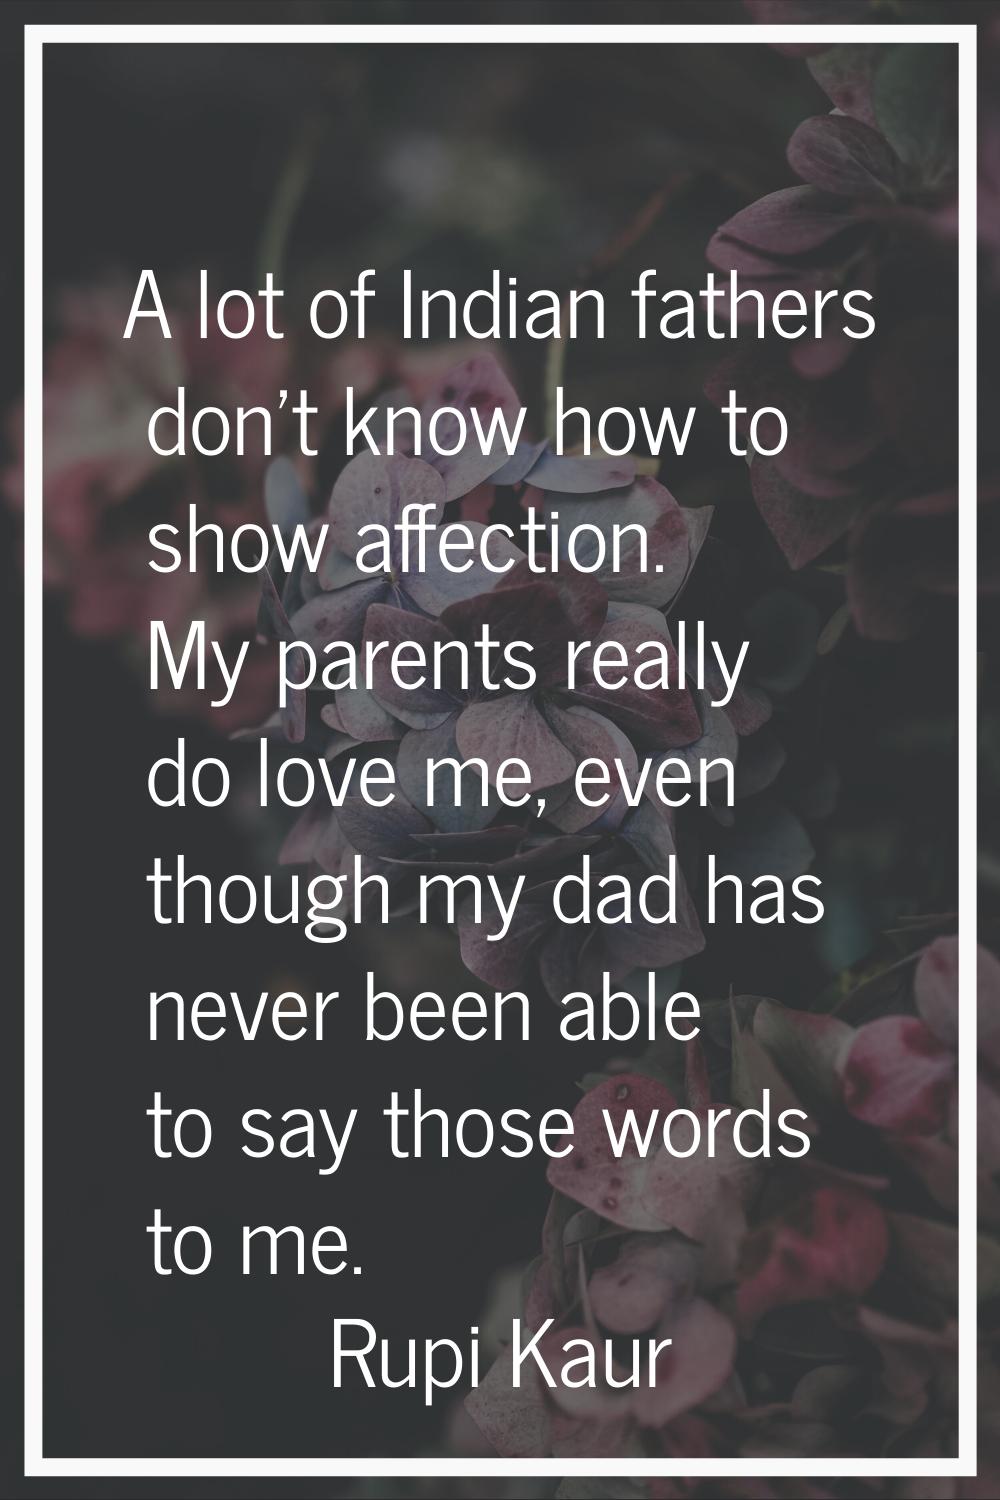 A lot of Indian fathers don't know how to show affection. My parents really do love me, even though